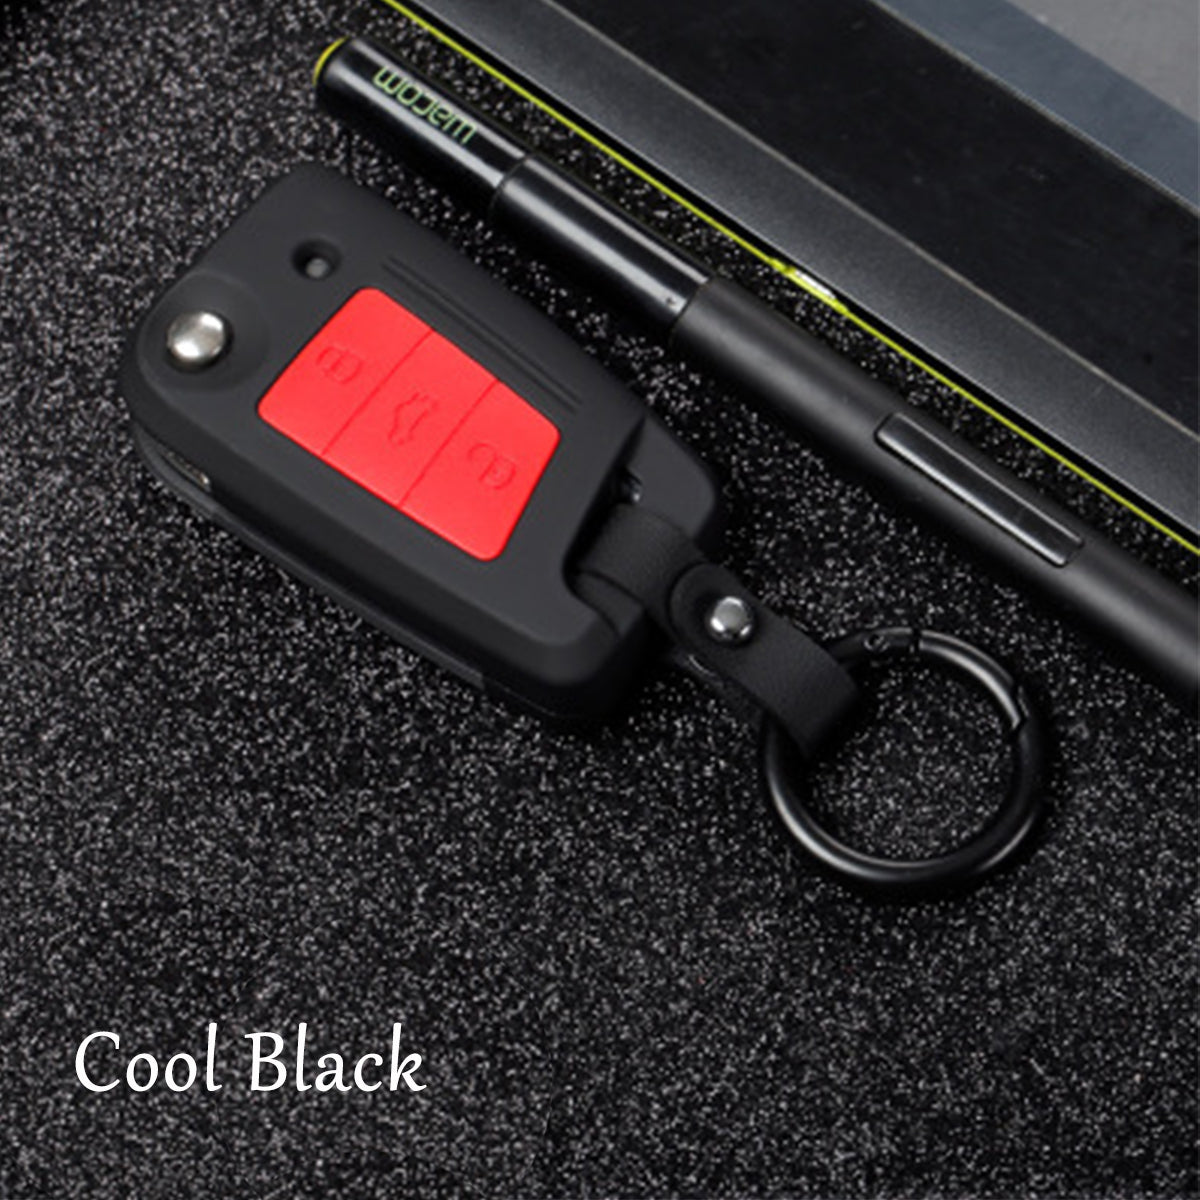 Car Key Cover Silicone Protective Case With Belt Buckle Suitable For Volkswagen/Golf/Jetta/Skoda - Auto GoShop